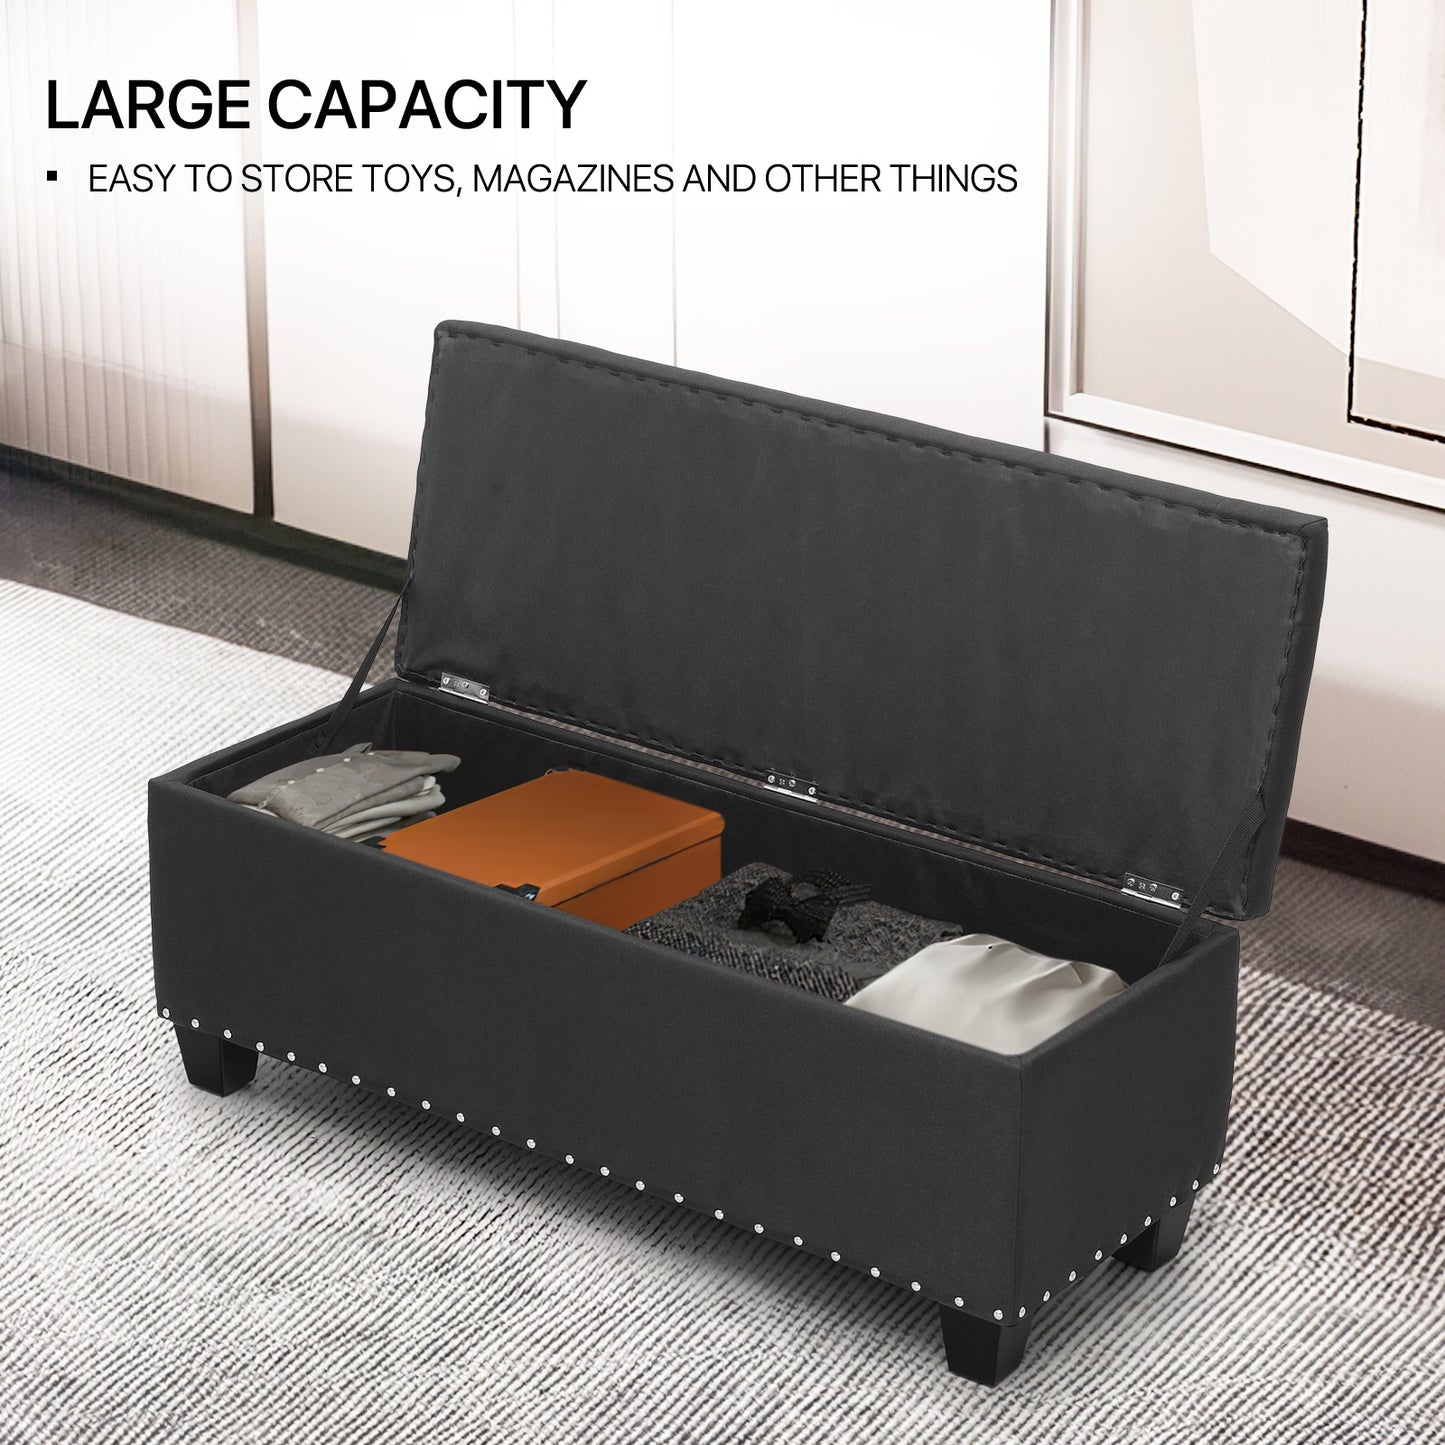 42" Storage Bench Lift Top Tufted Poufs Ottoman Upholstered Footrest Stool